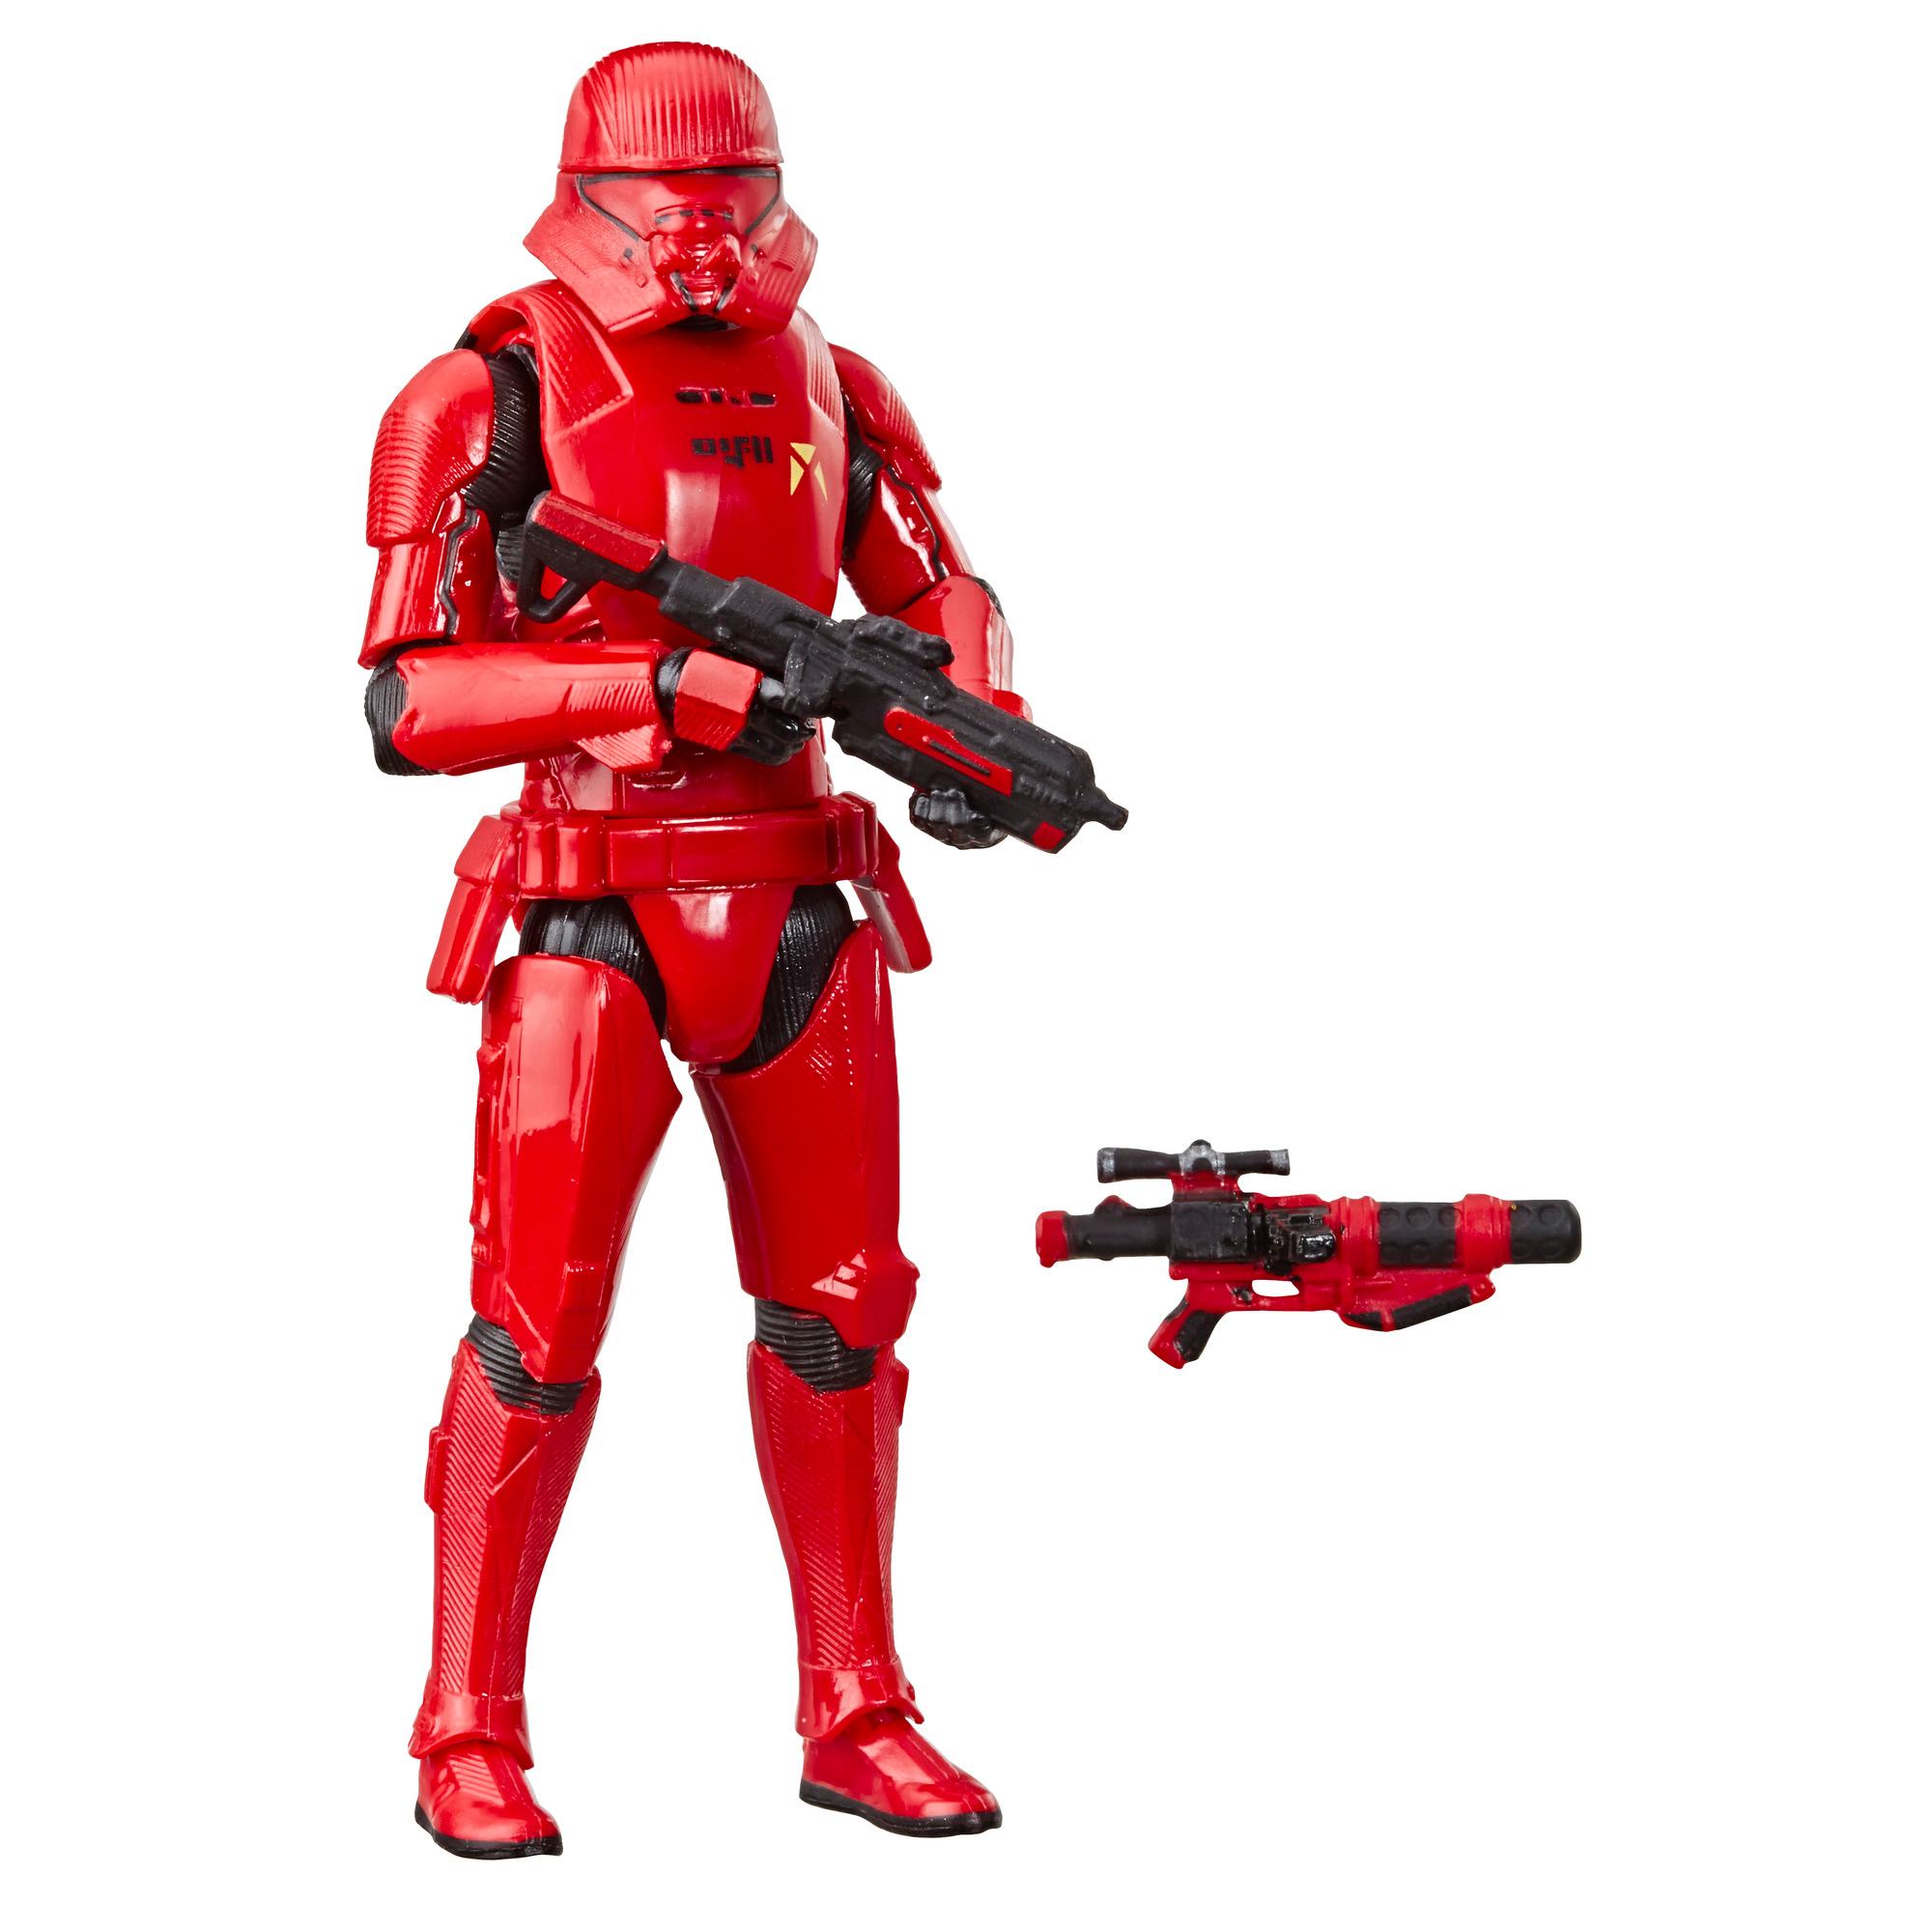 Star Wars Vintage Collection Sith Jet Trooper loose figure VC159 2019 TVC 3.75" 